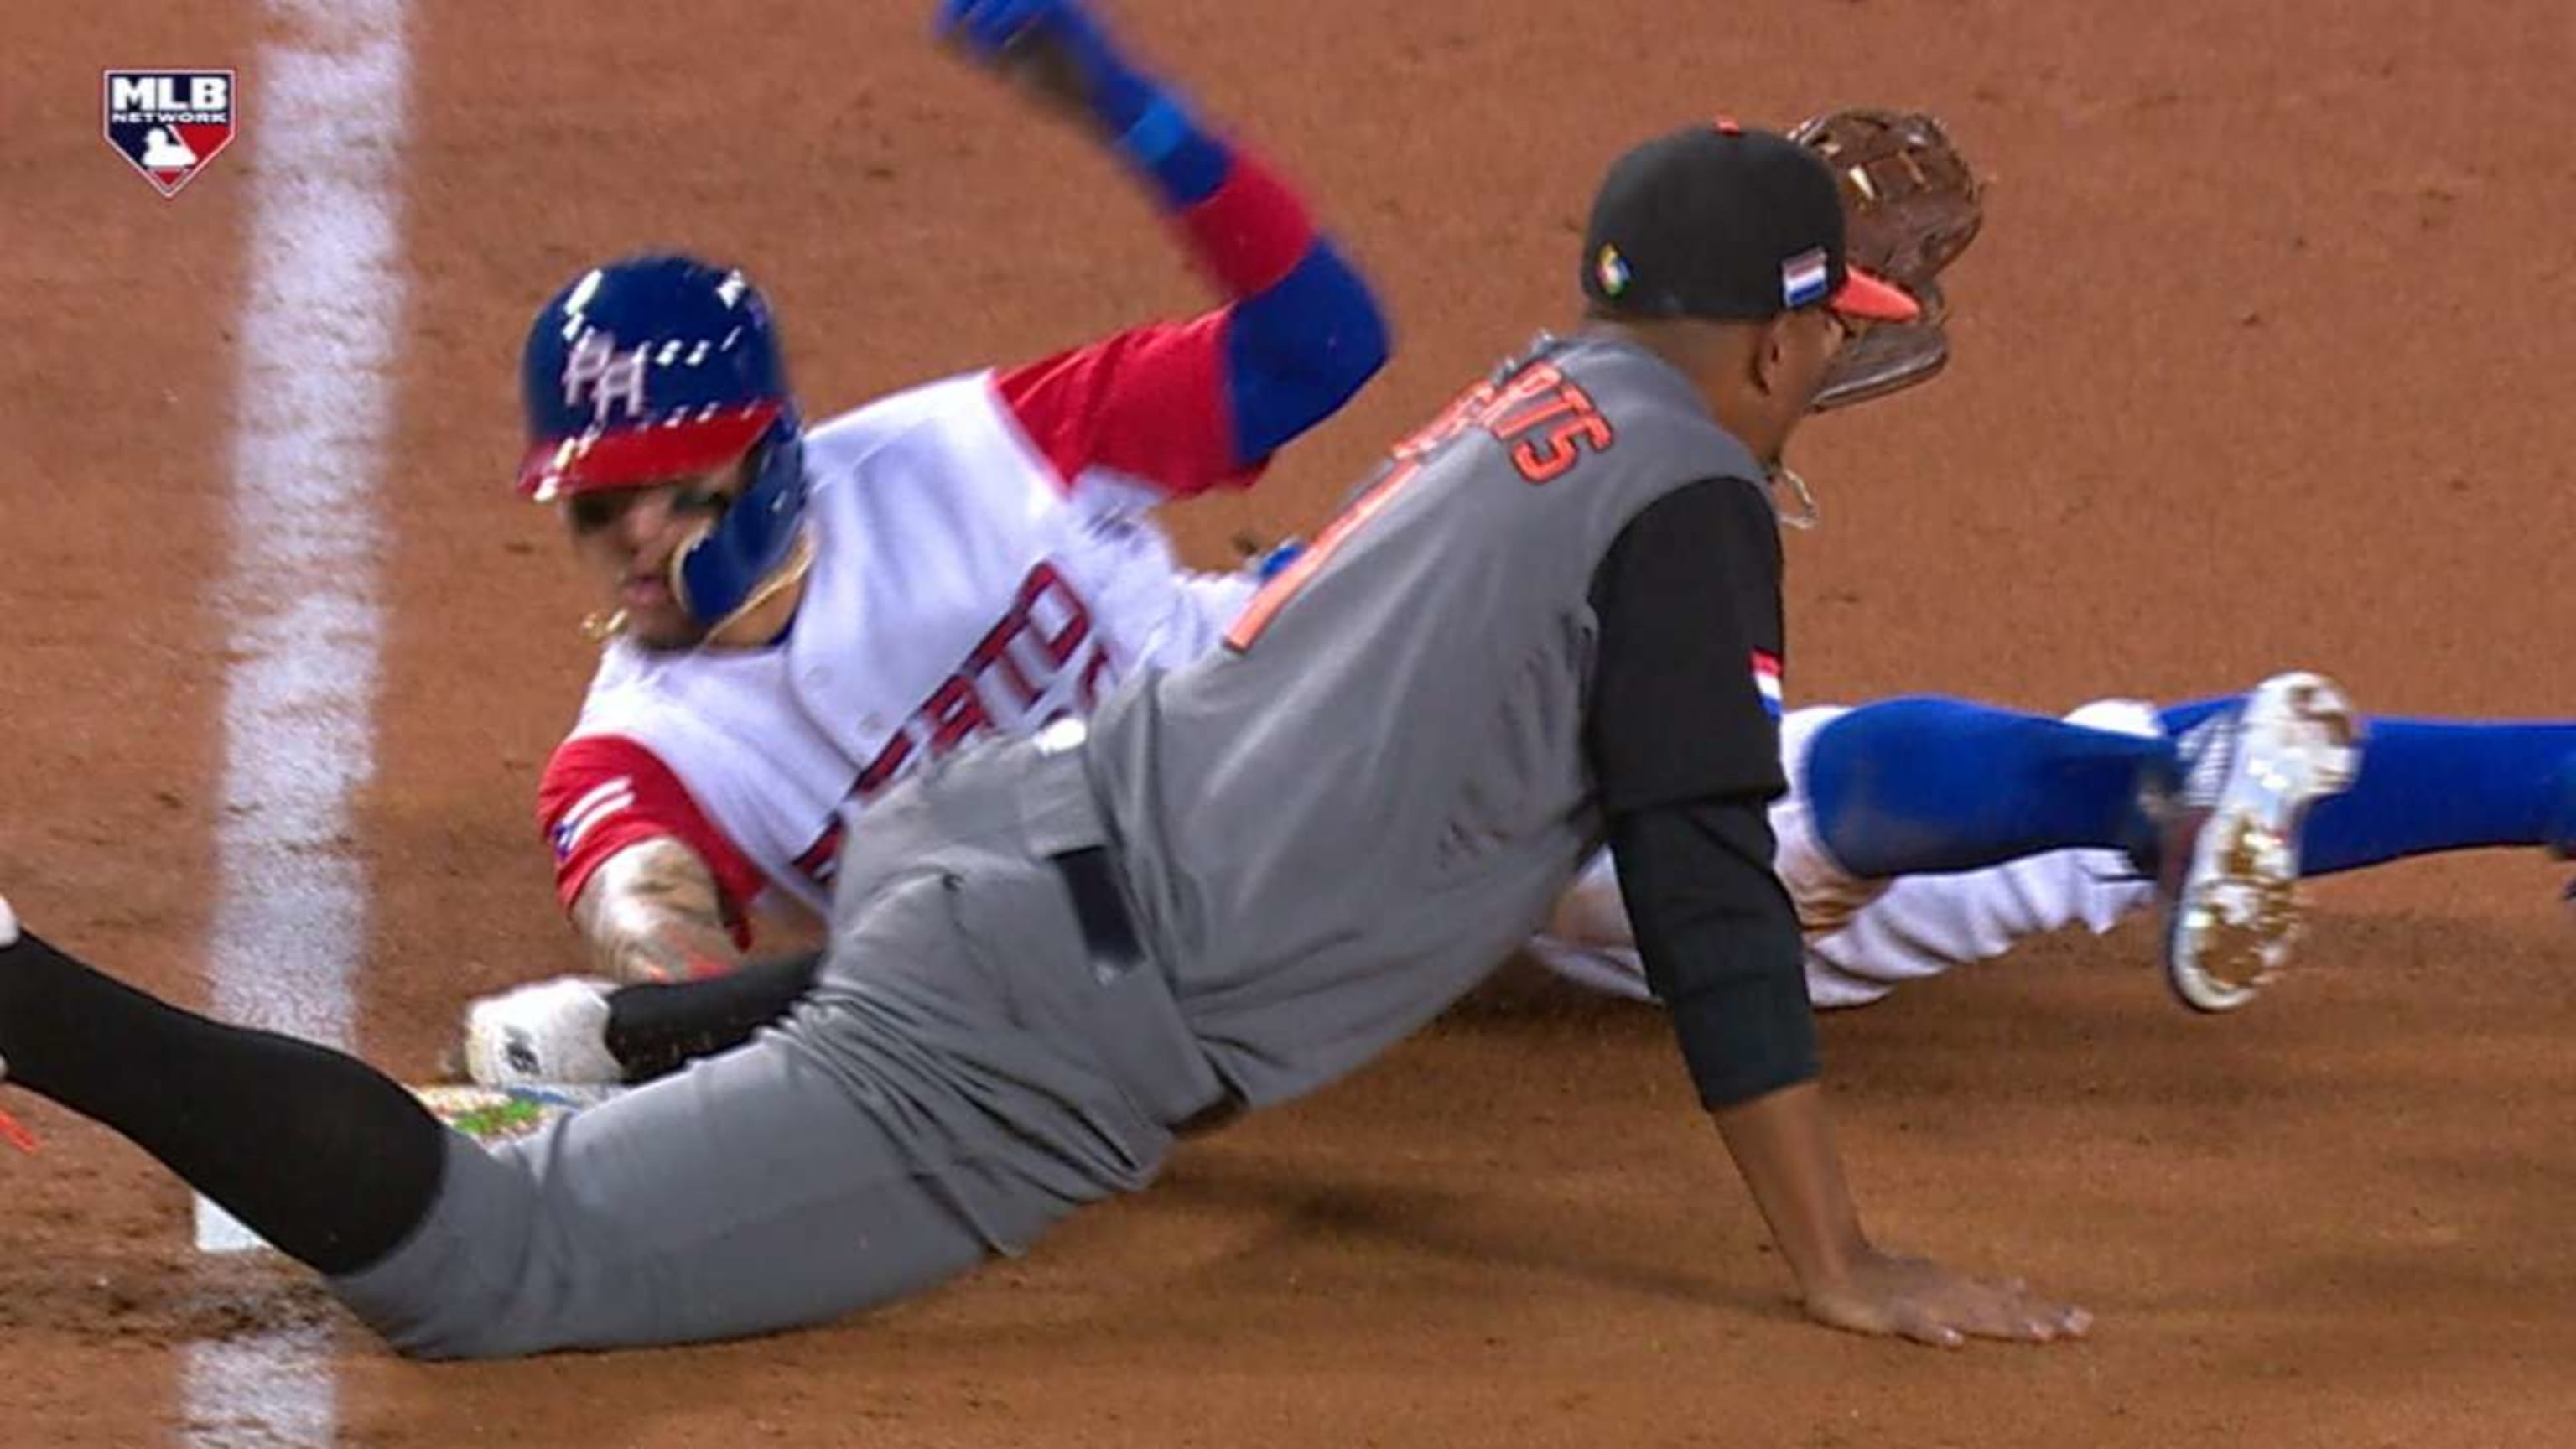 For his next act, baseball magician Javy Baez used sleight of hand to avoid  a tag and steal third base